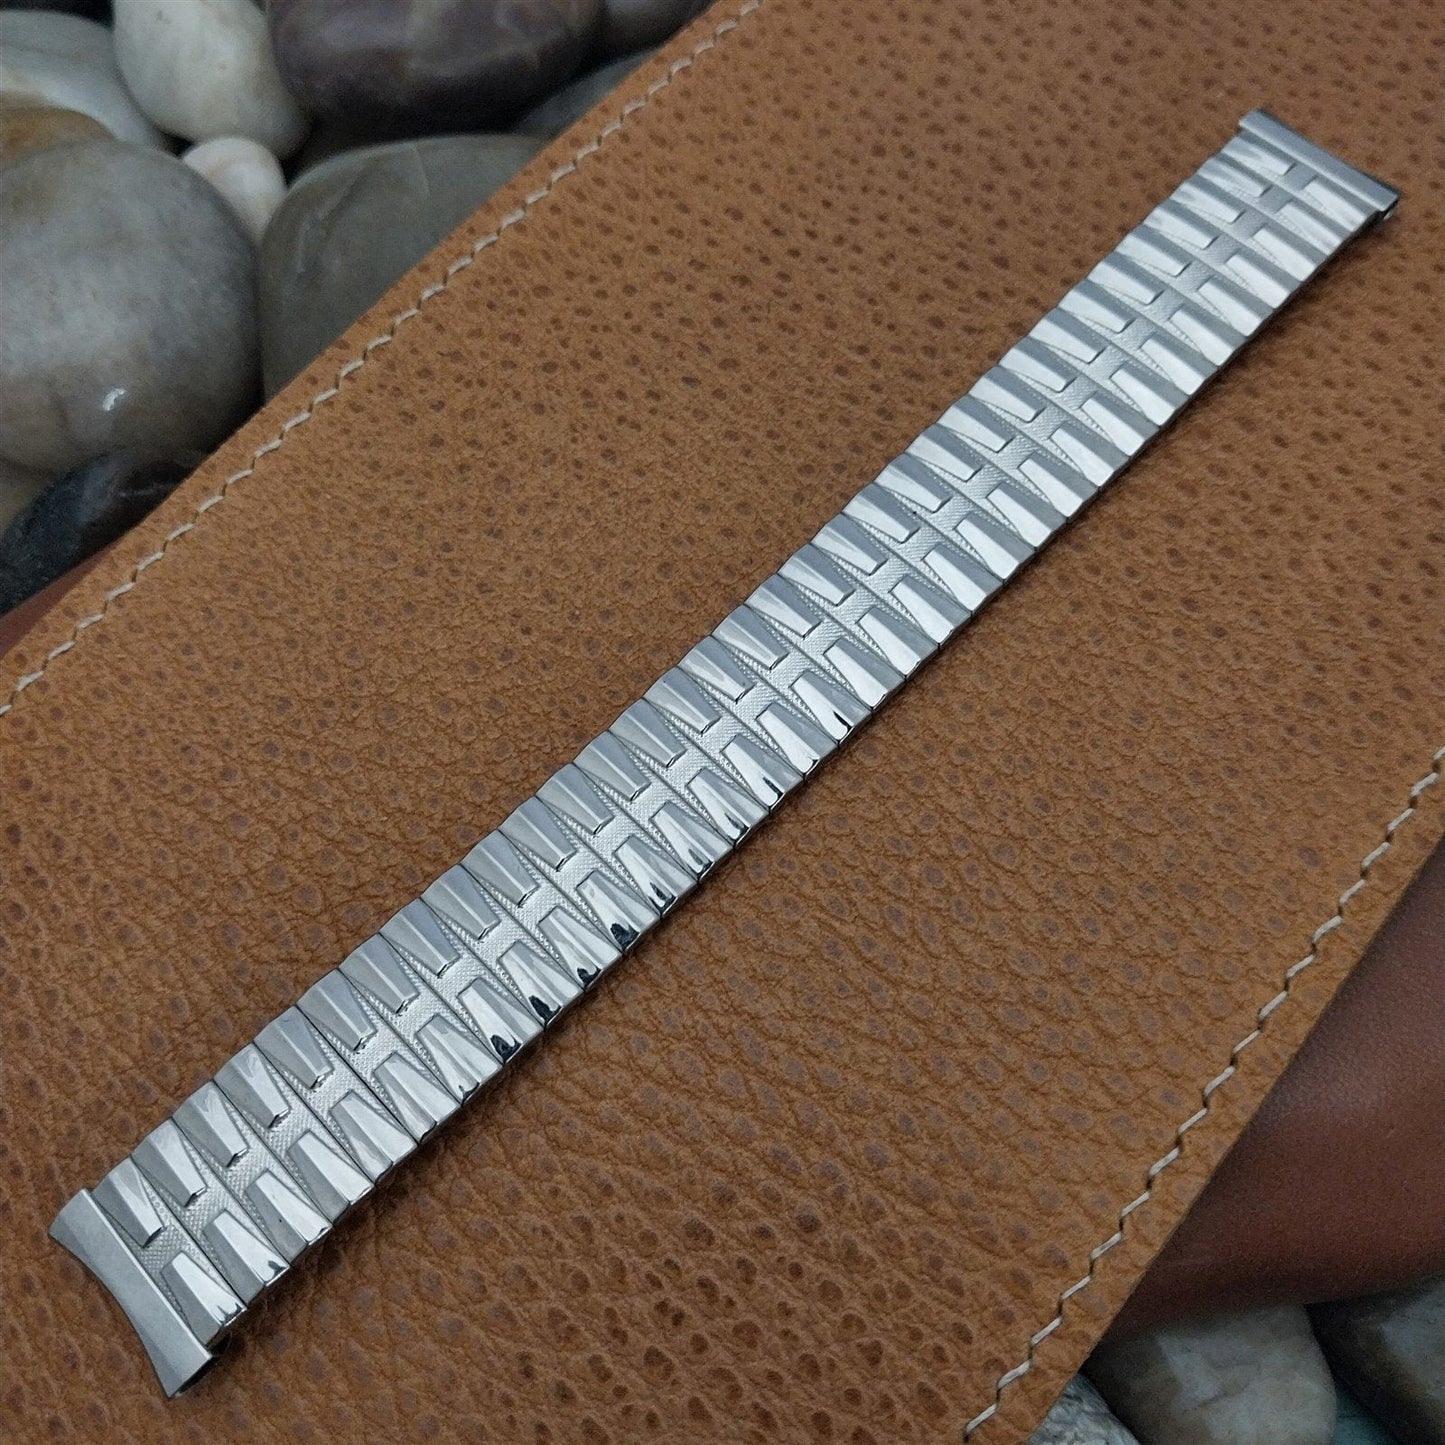 17.2mm Uniflex Stainless Steel Stretch Expansion Unused 1960s Vintage Watch Band